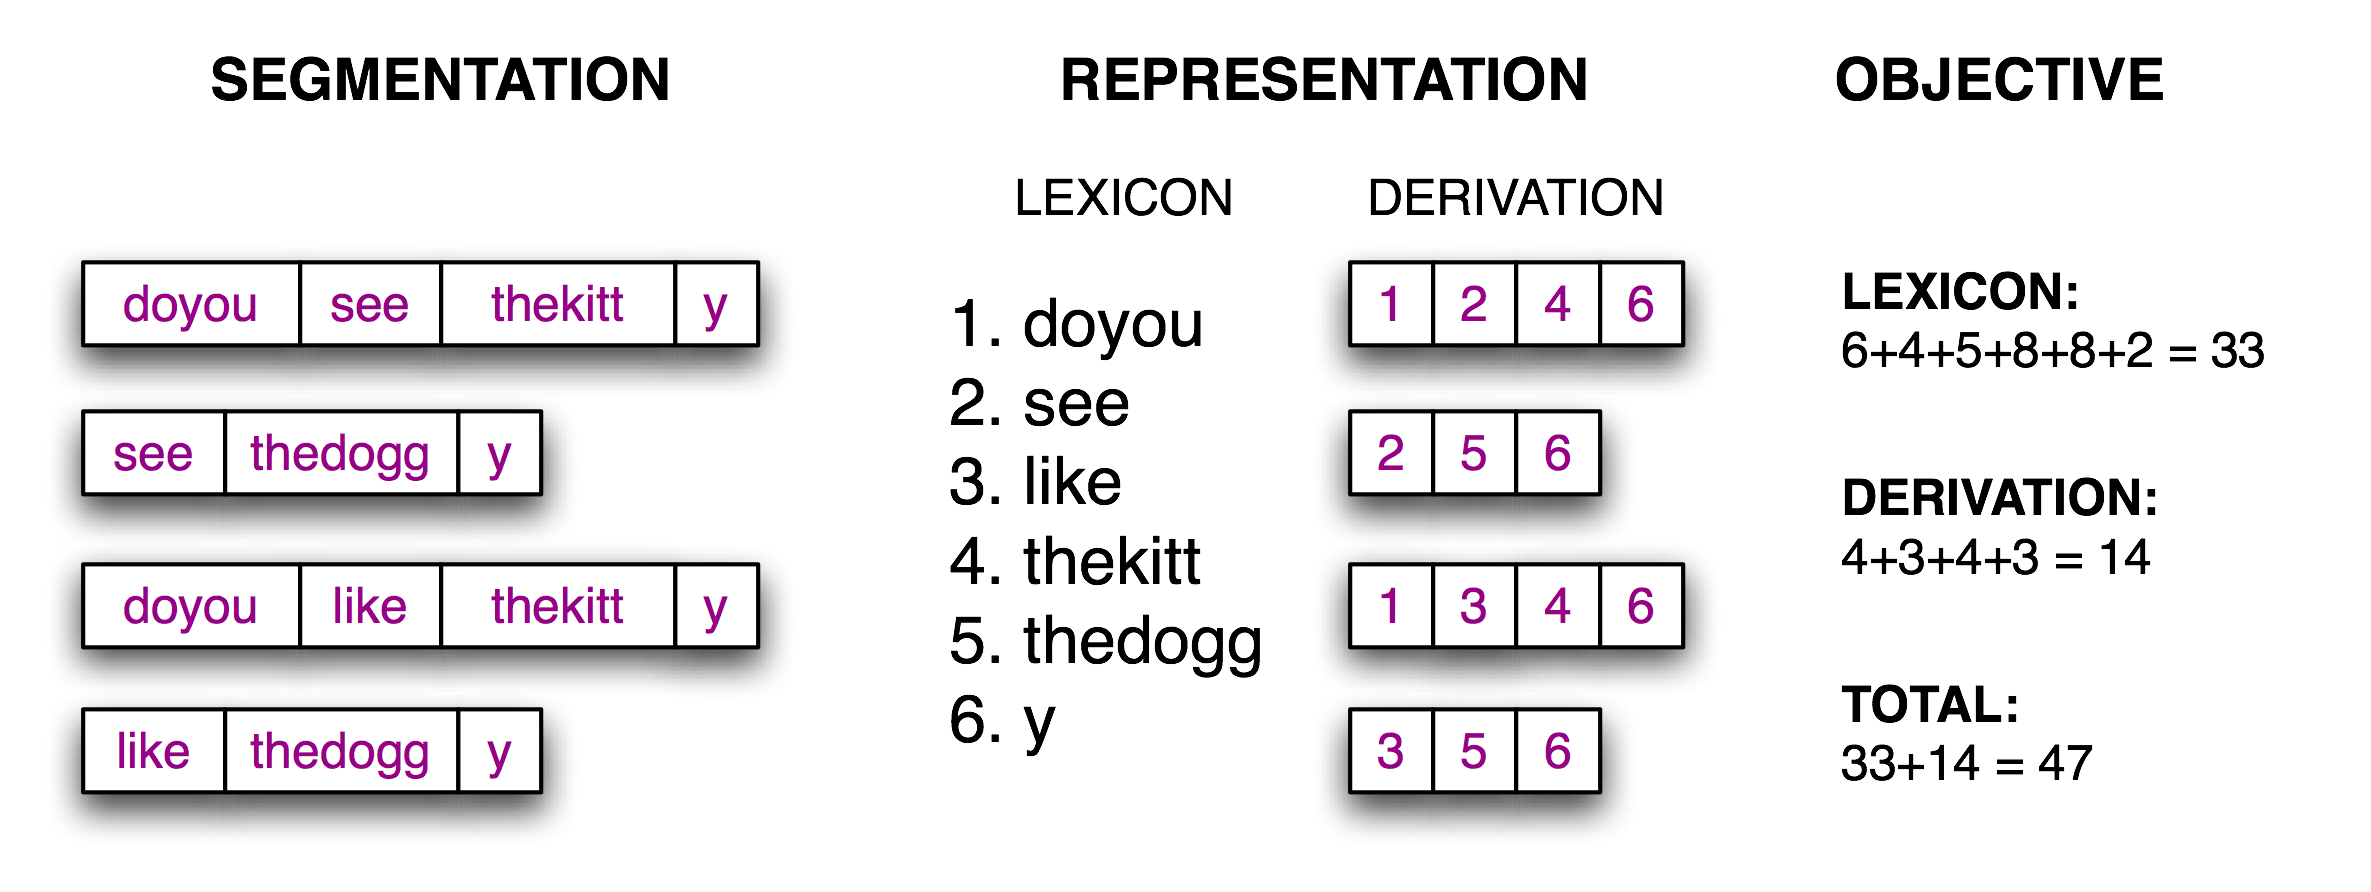 Calculation of Objective Function: Given a hypothetical segmentation of the source text (on the left), derive a lexicon and a derivation table that permit the source text to be reconstructed, then total up the number of characters used by each lexical item (including a boundary marker) and the number of lexical items used by each derivation, to serve as a score of the quality of the segmentation; smaller values of the score indicate a better segmentation.